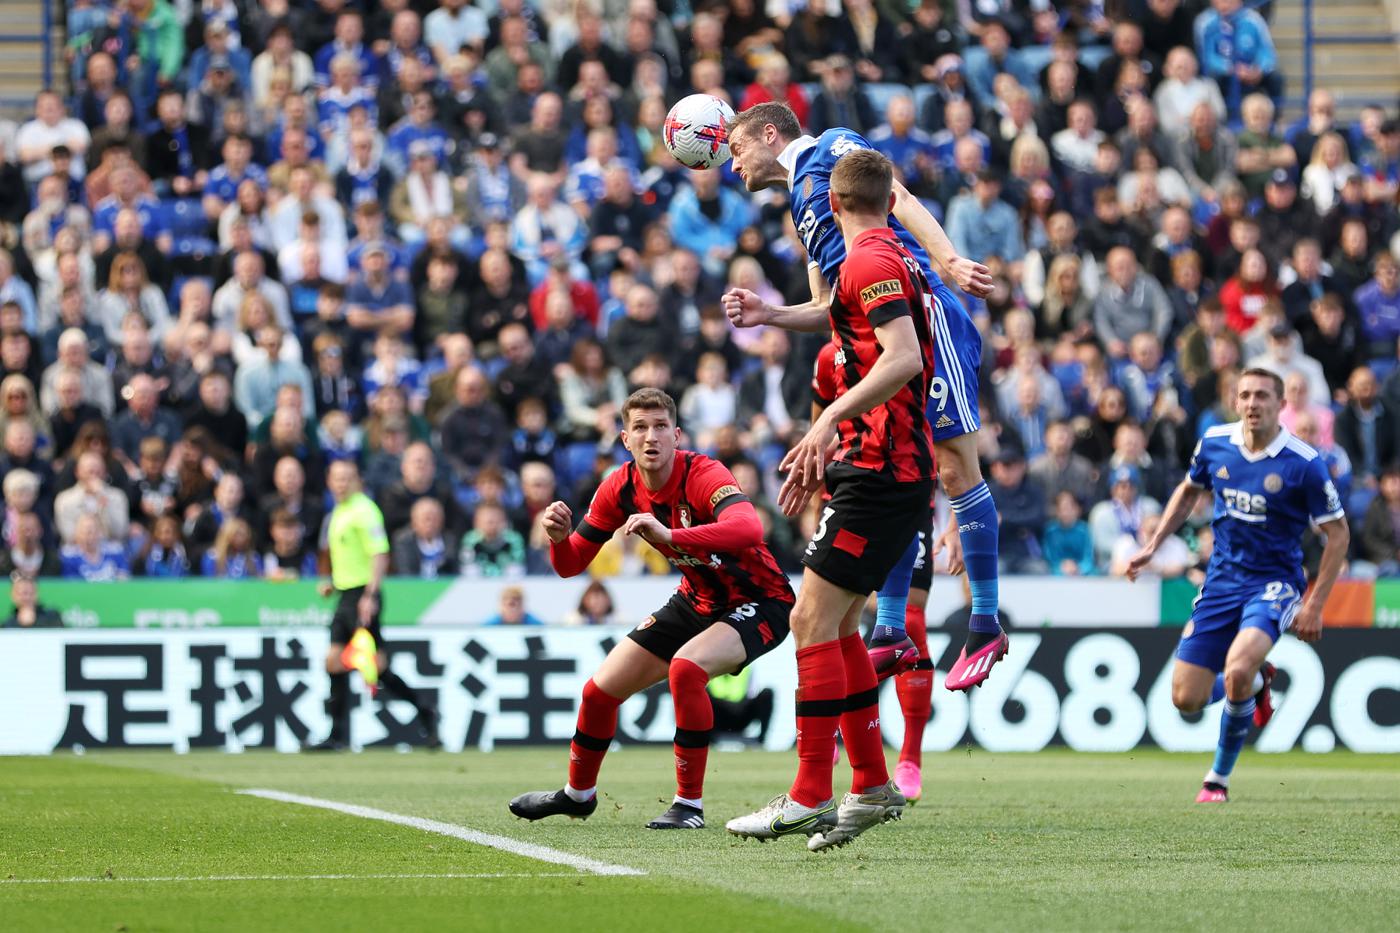 Leicester - Bournemouth - 0:1. English Championship, round 30. Match review, statistics.